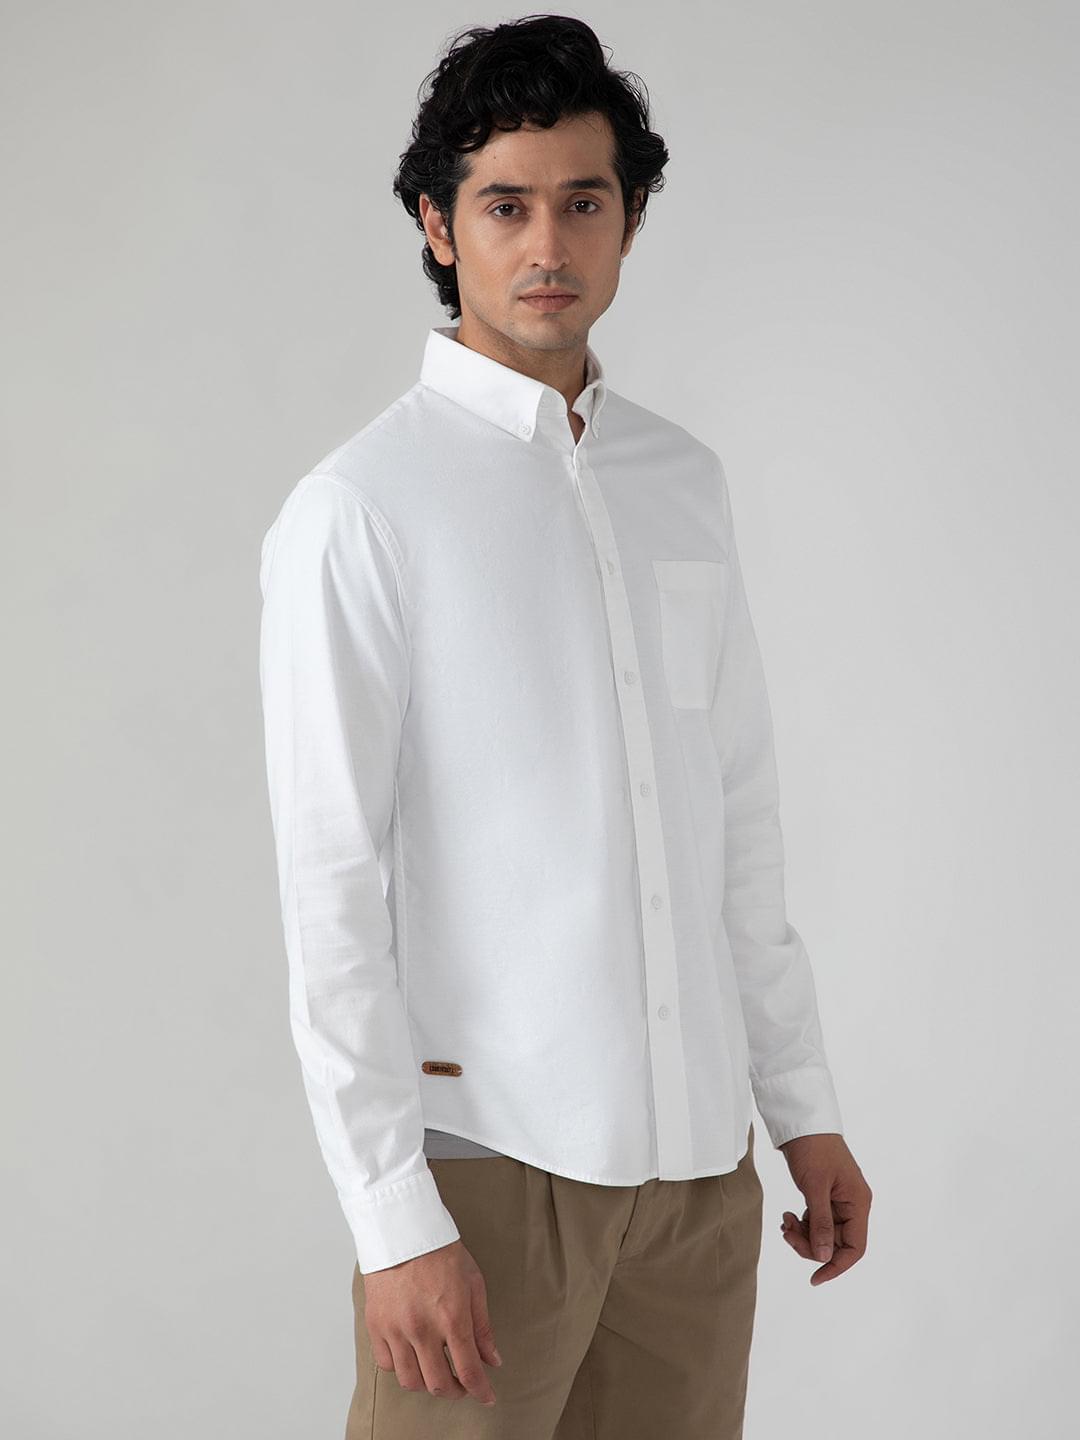 2 Way Stretch Oxford Shirt in White- Comfort Fit